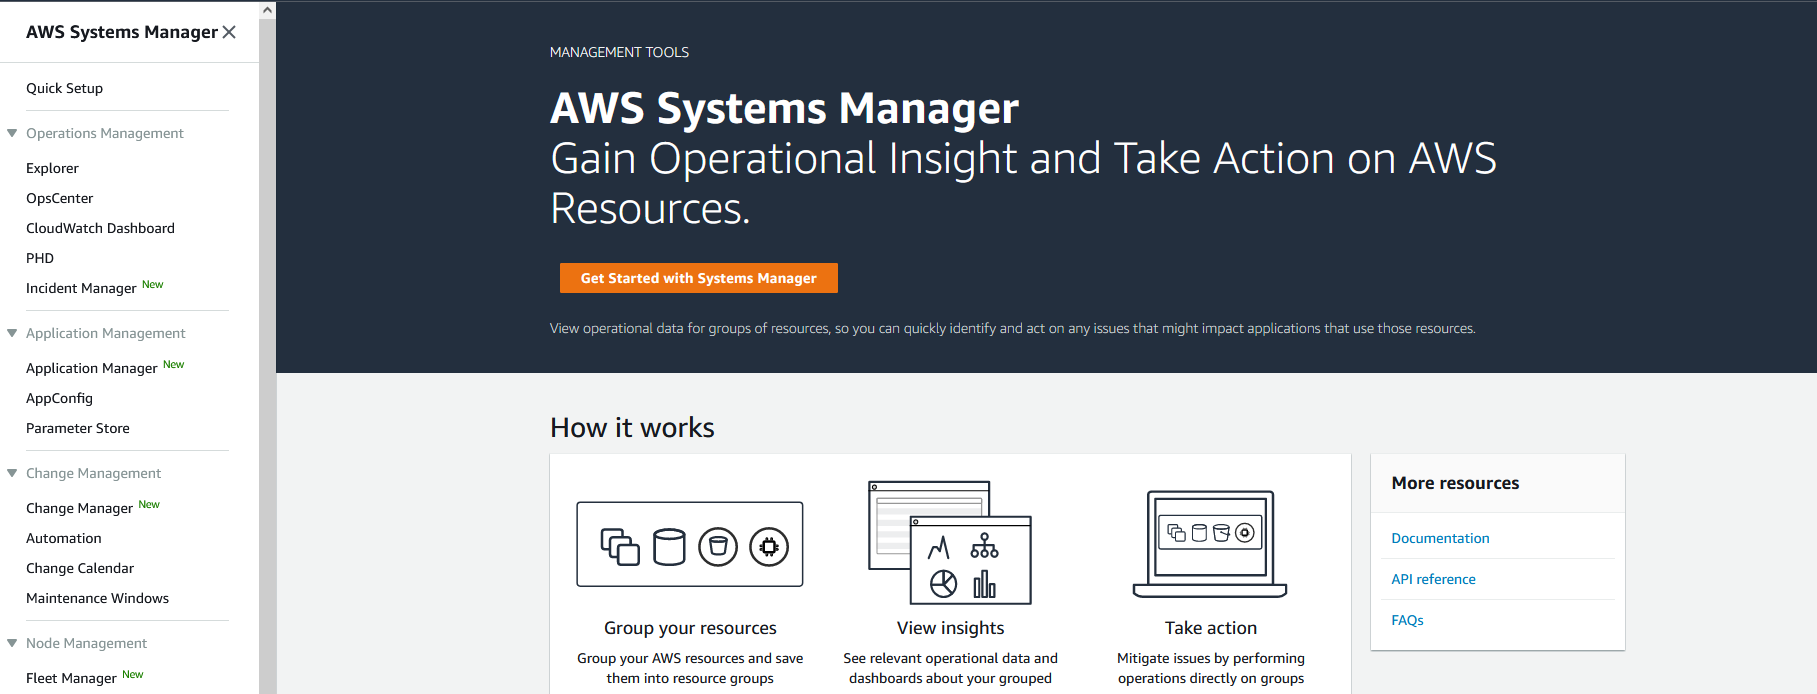 AWS Systems Manager dashboard with navigation along the left side with links for cloudwatch dashboard, application manager, and parameter store.